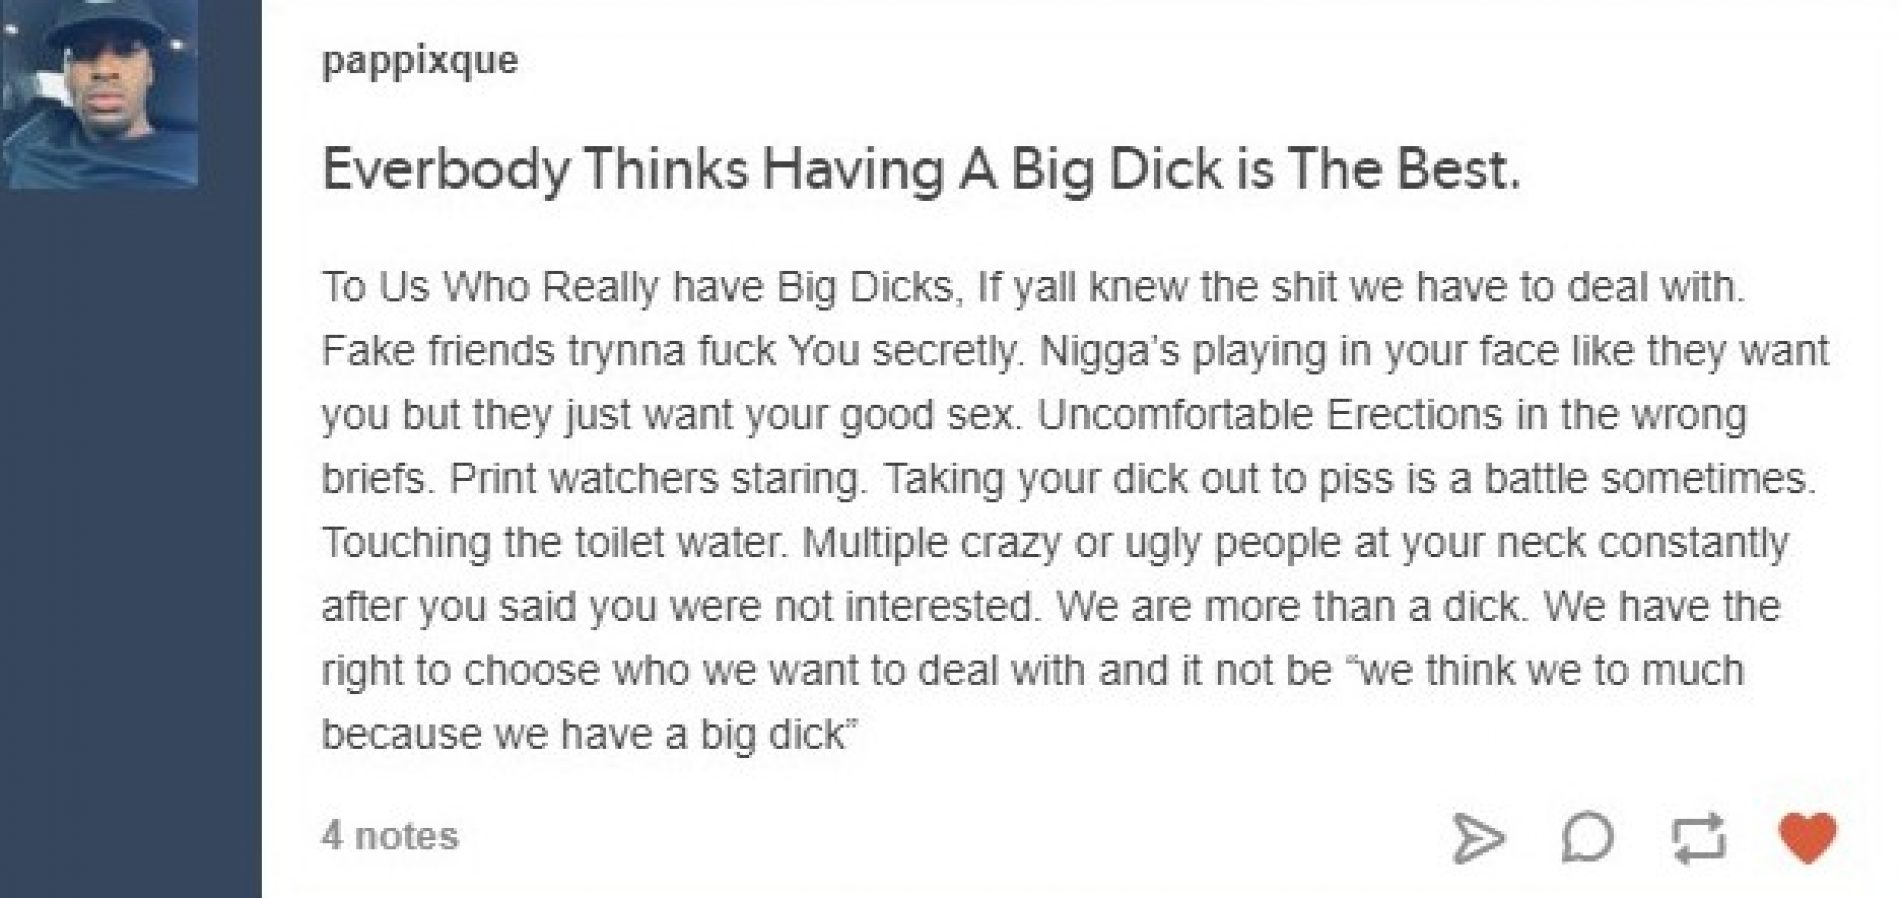 The Woes of a Big Dick